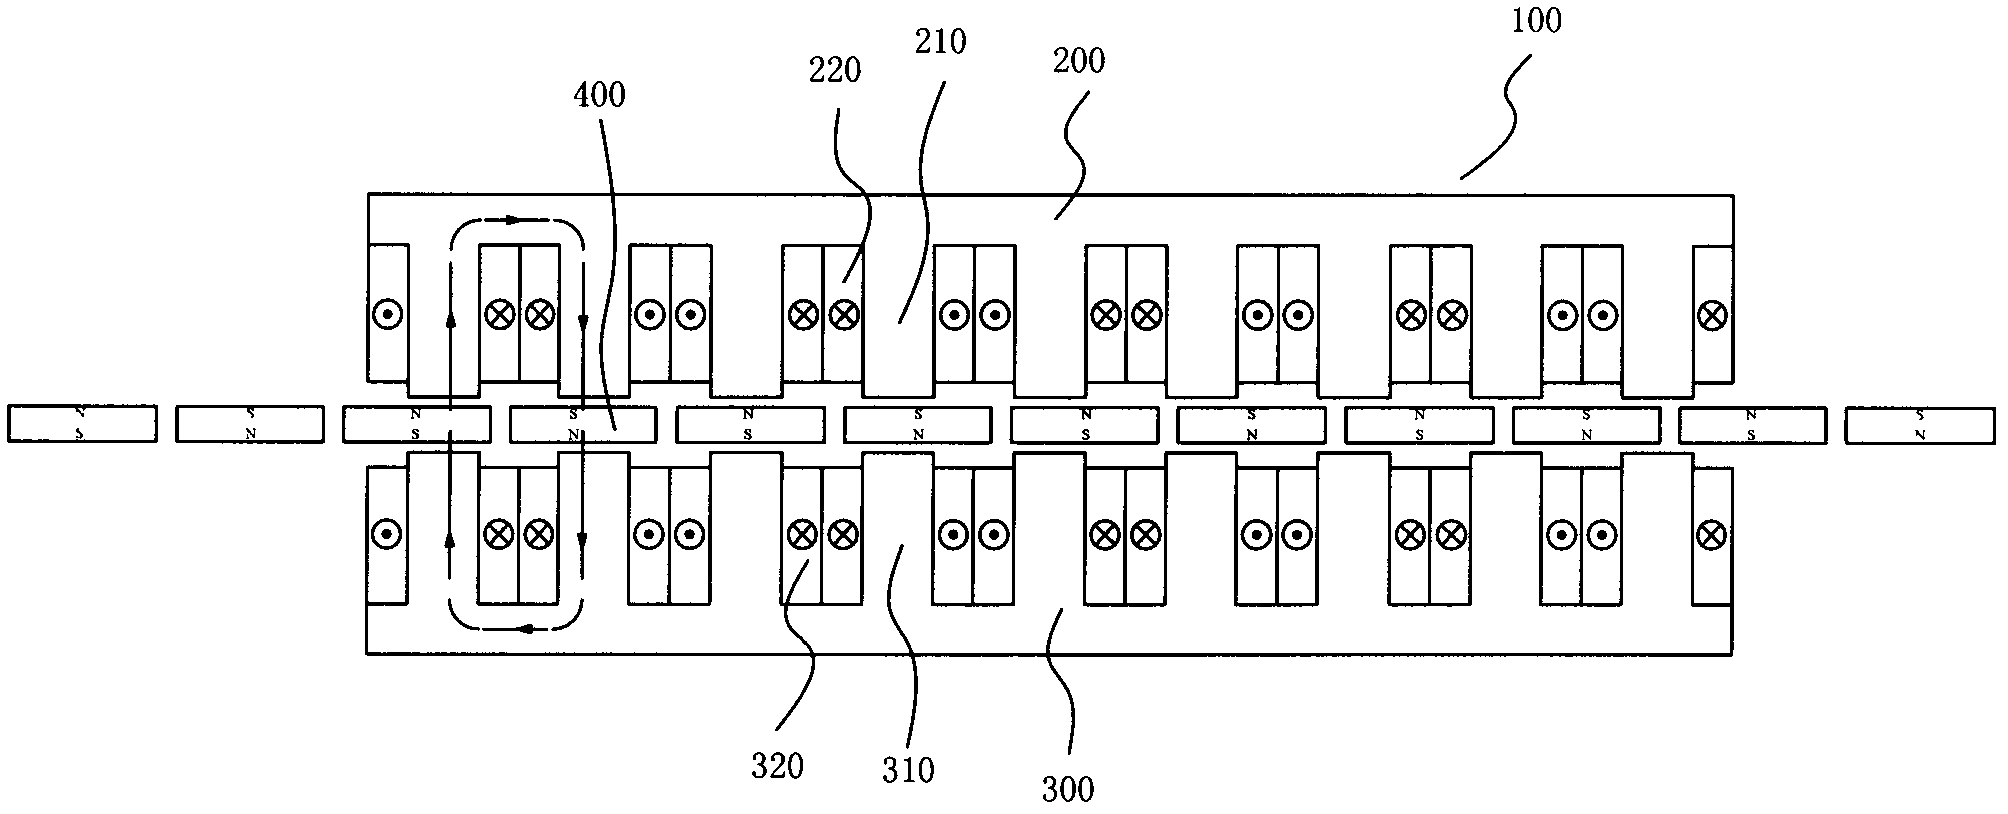 Linear motor capable of positioning load